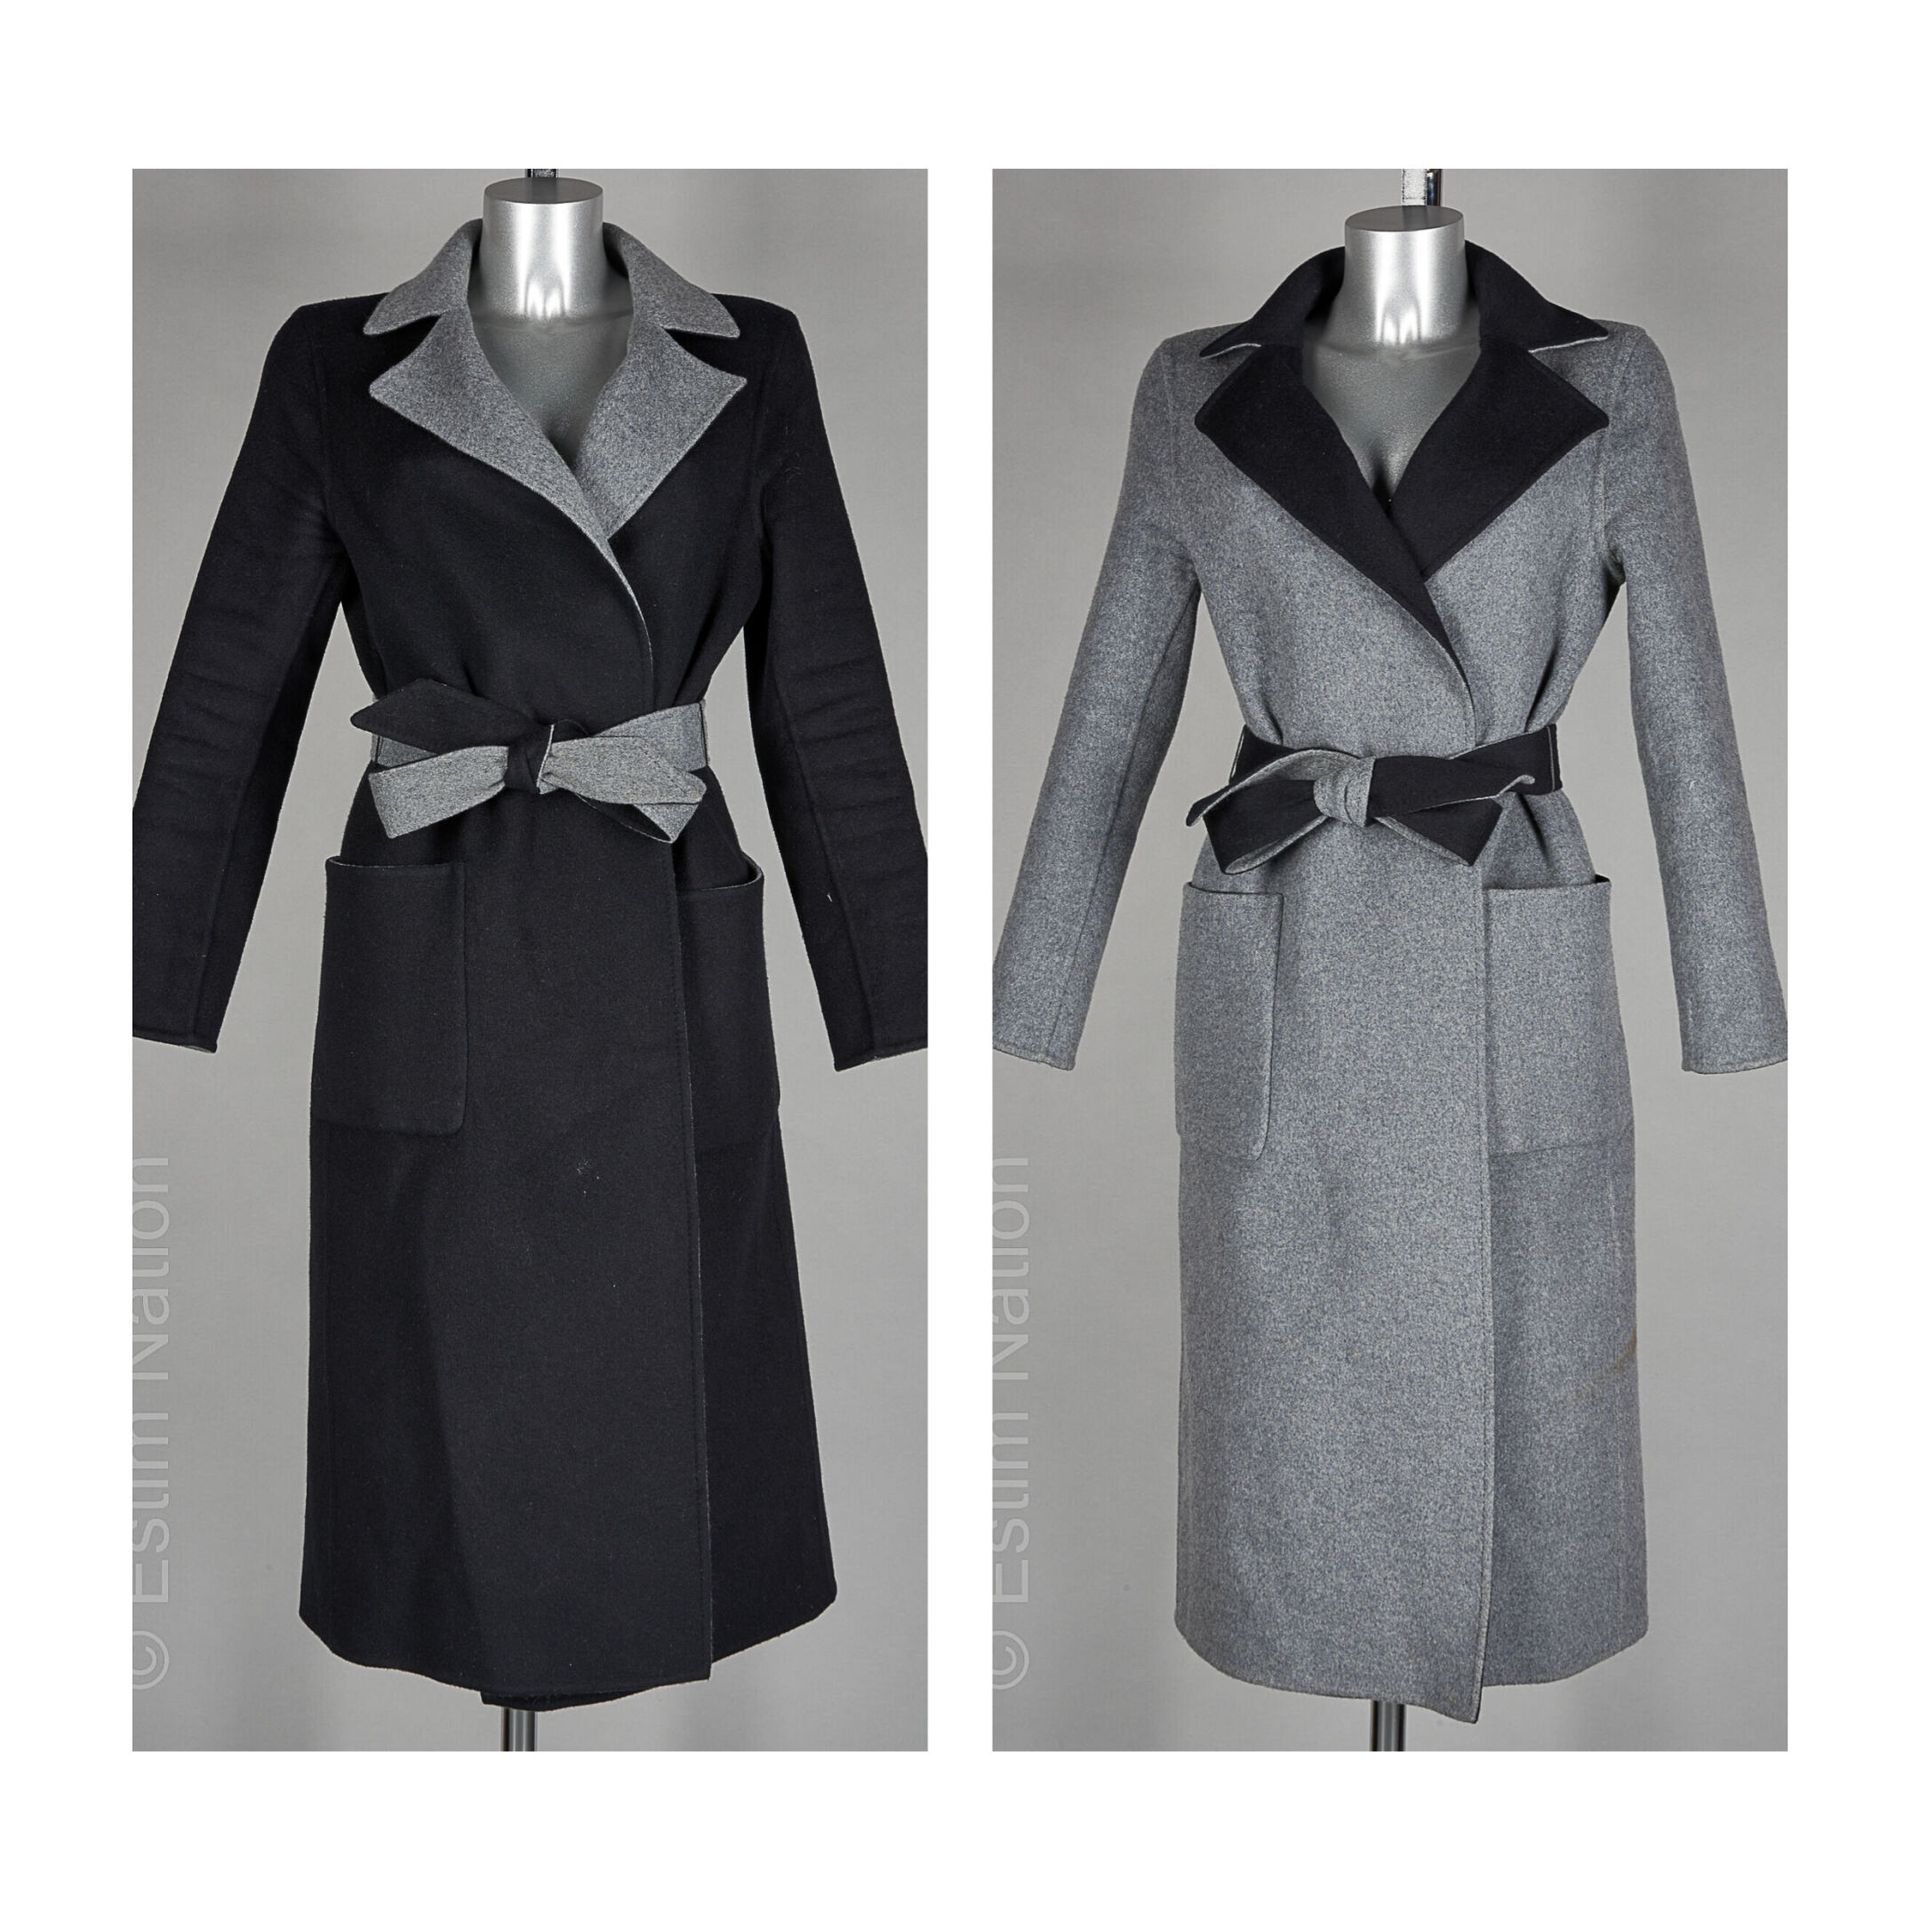 KUJTEN Reversible cashmere coat in black and grey, notched collar, belt, two poc&hellip;